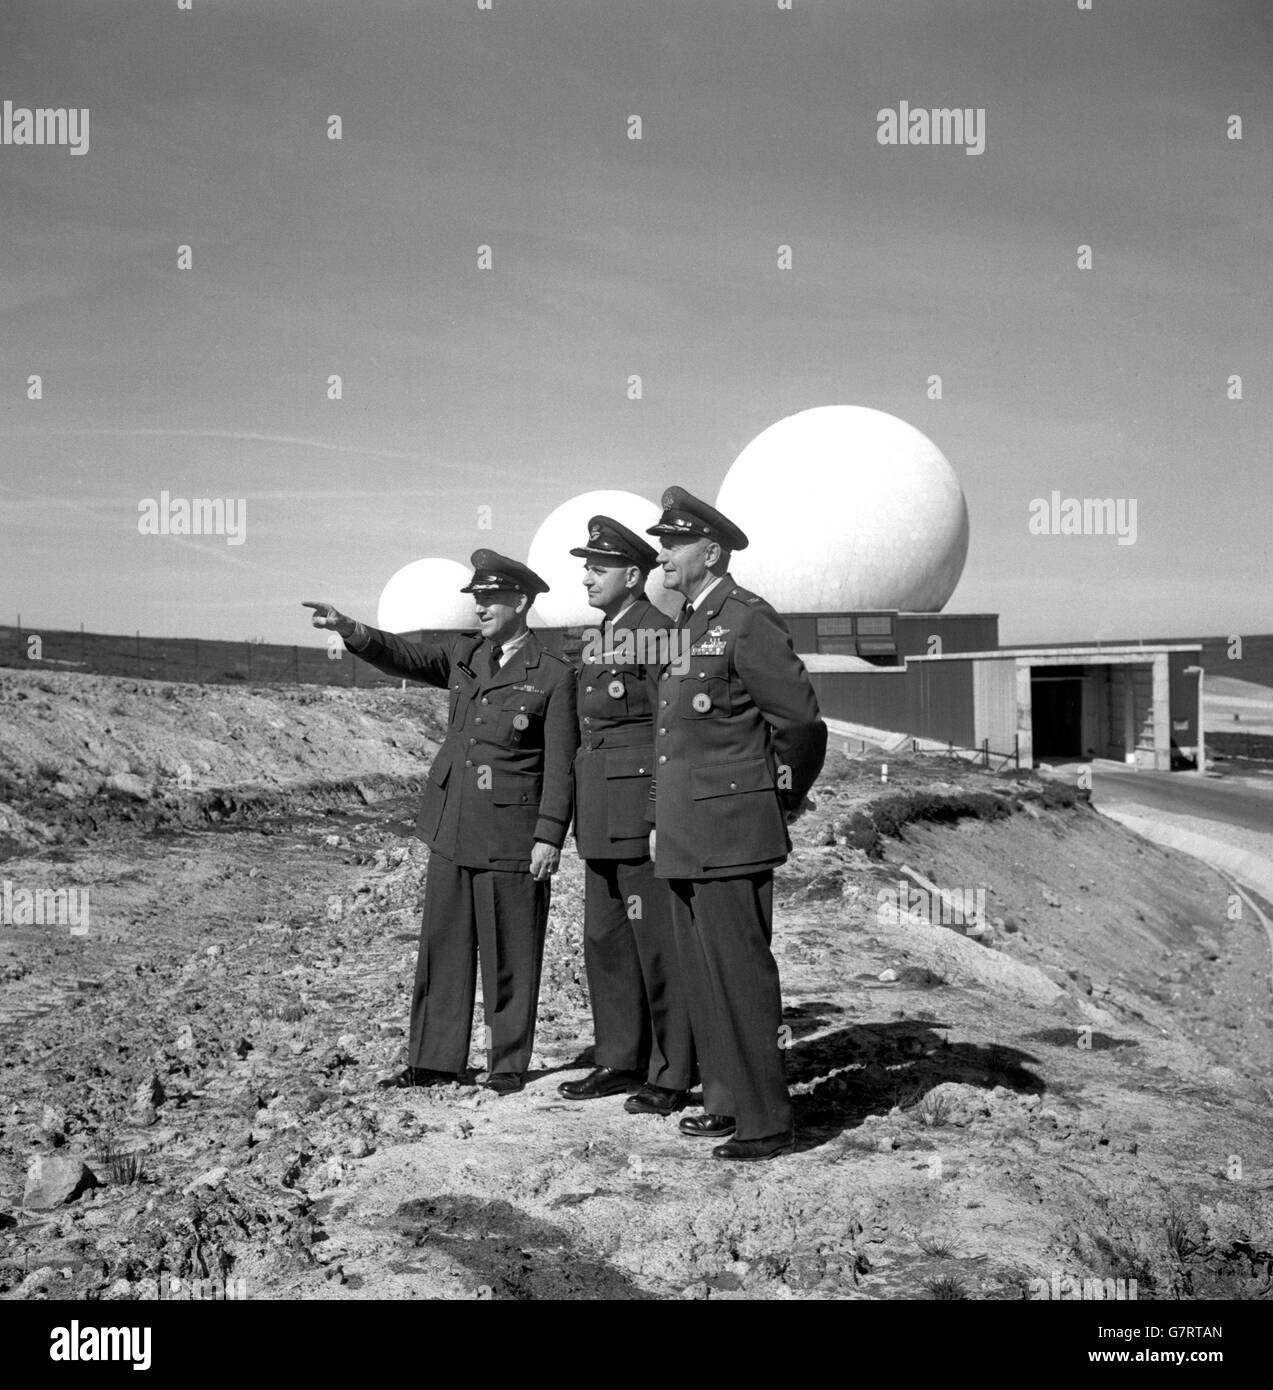 Missile balistico Early Warning System Station - RAF - Fylingdales Mori, Nord Yorskhire Foto Stock